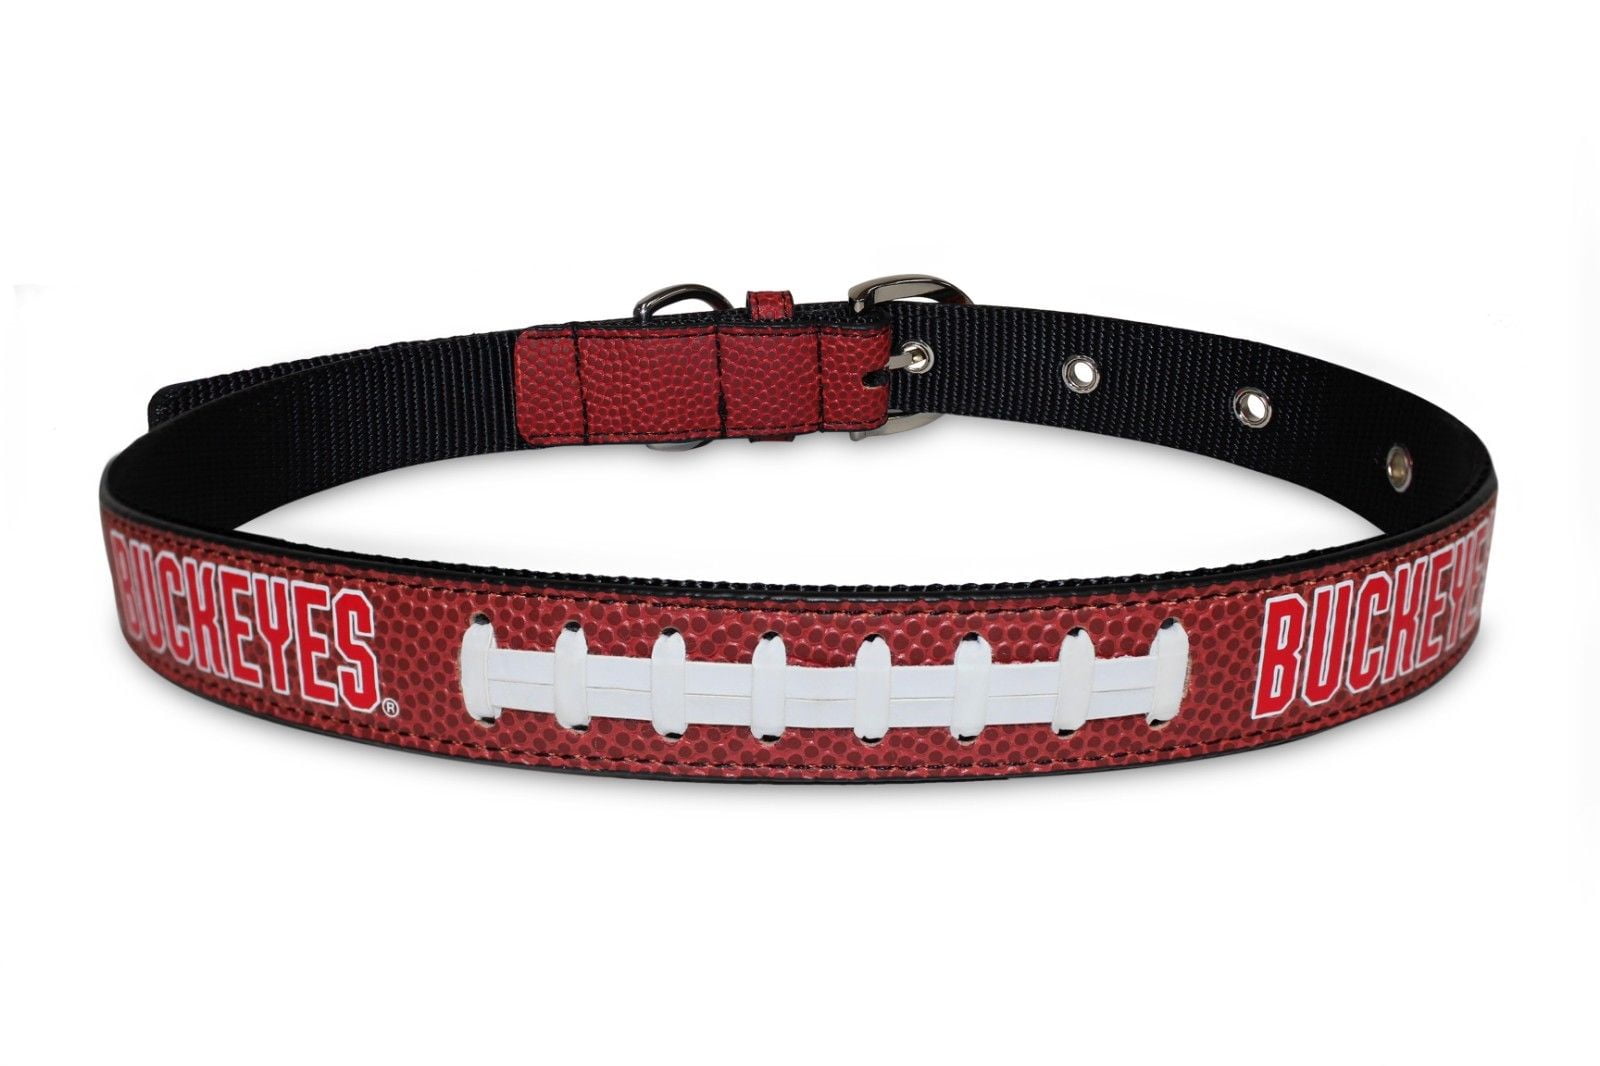 Pets First Ohio State Buckeyes Collar 